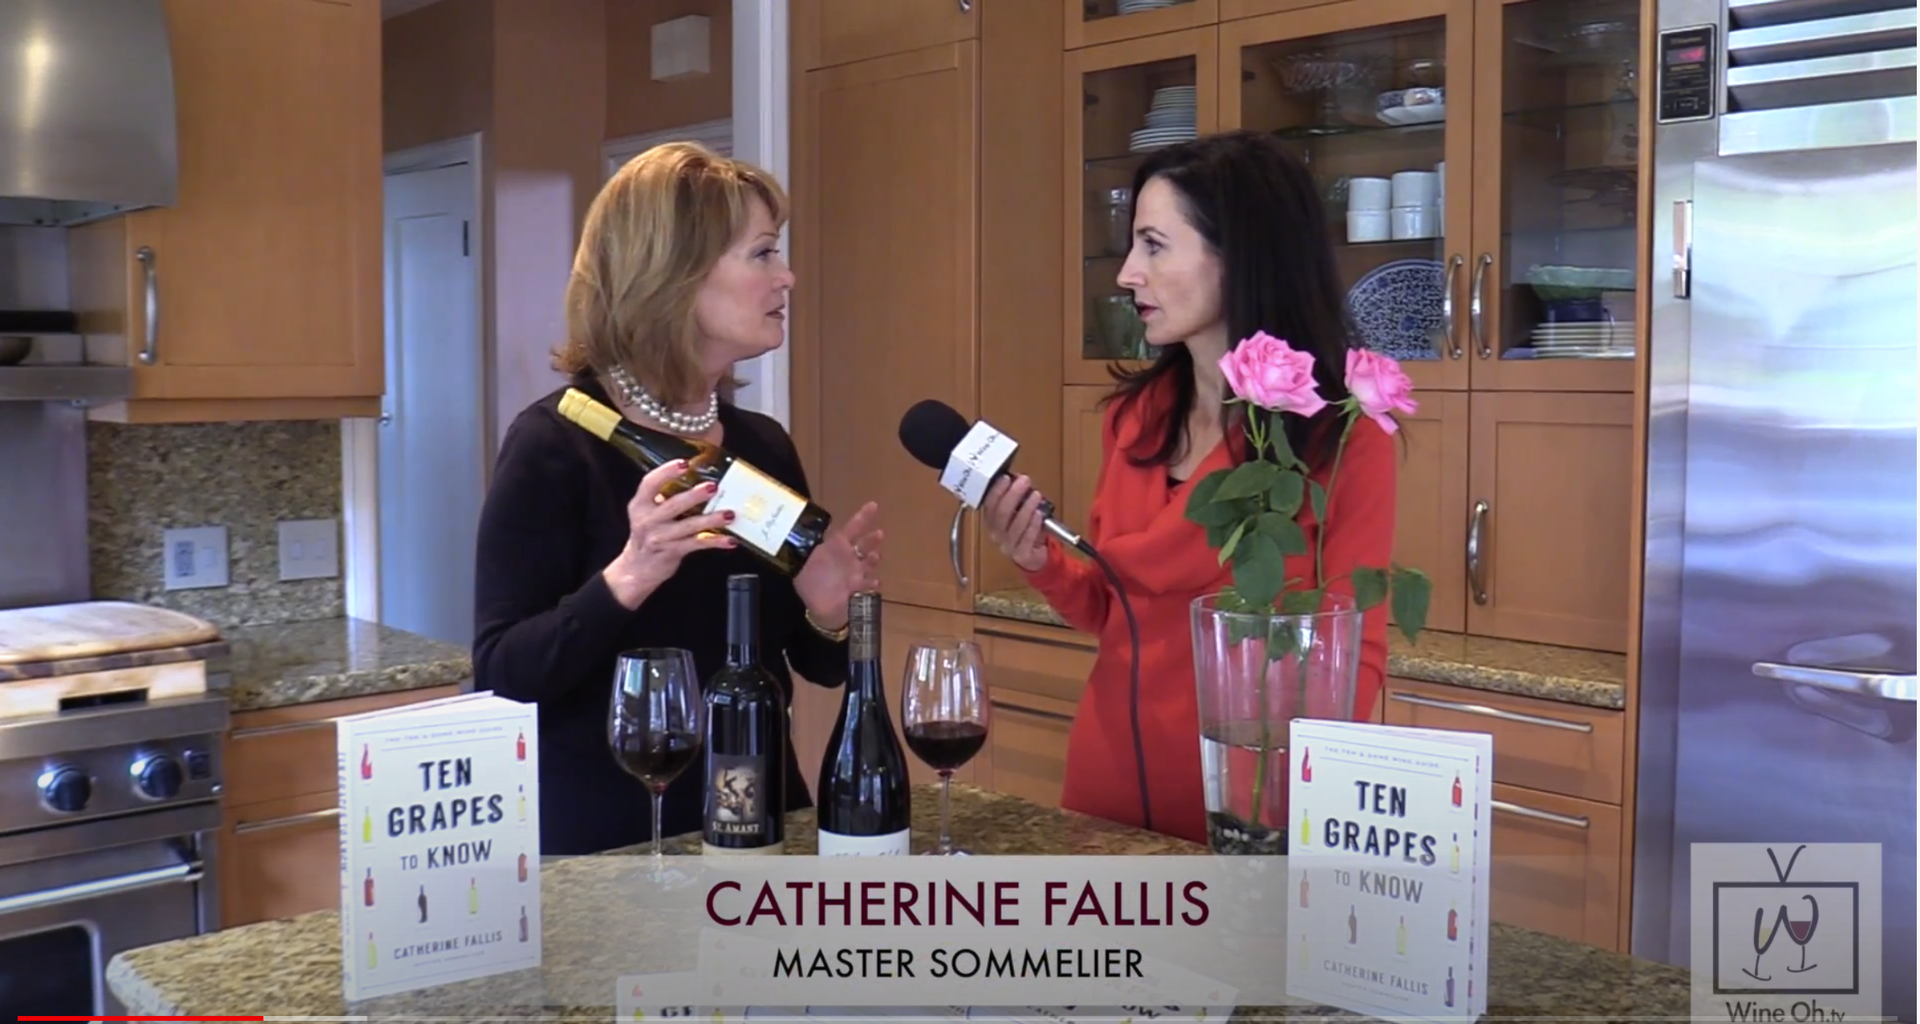 Master Sommelier Reveals 3 Wine Grapes You Must Know - Wine Oh TV